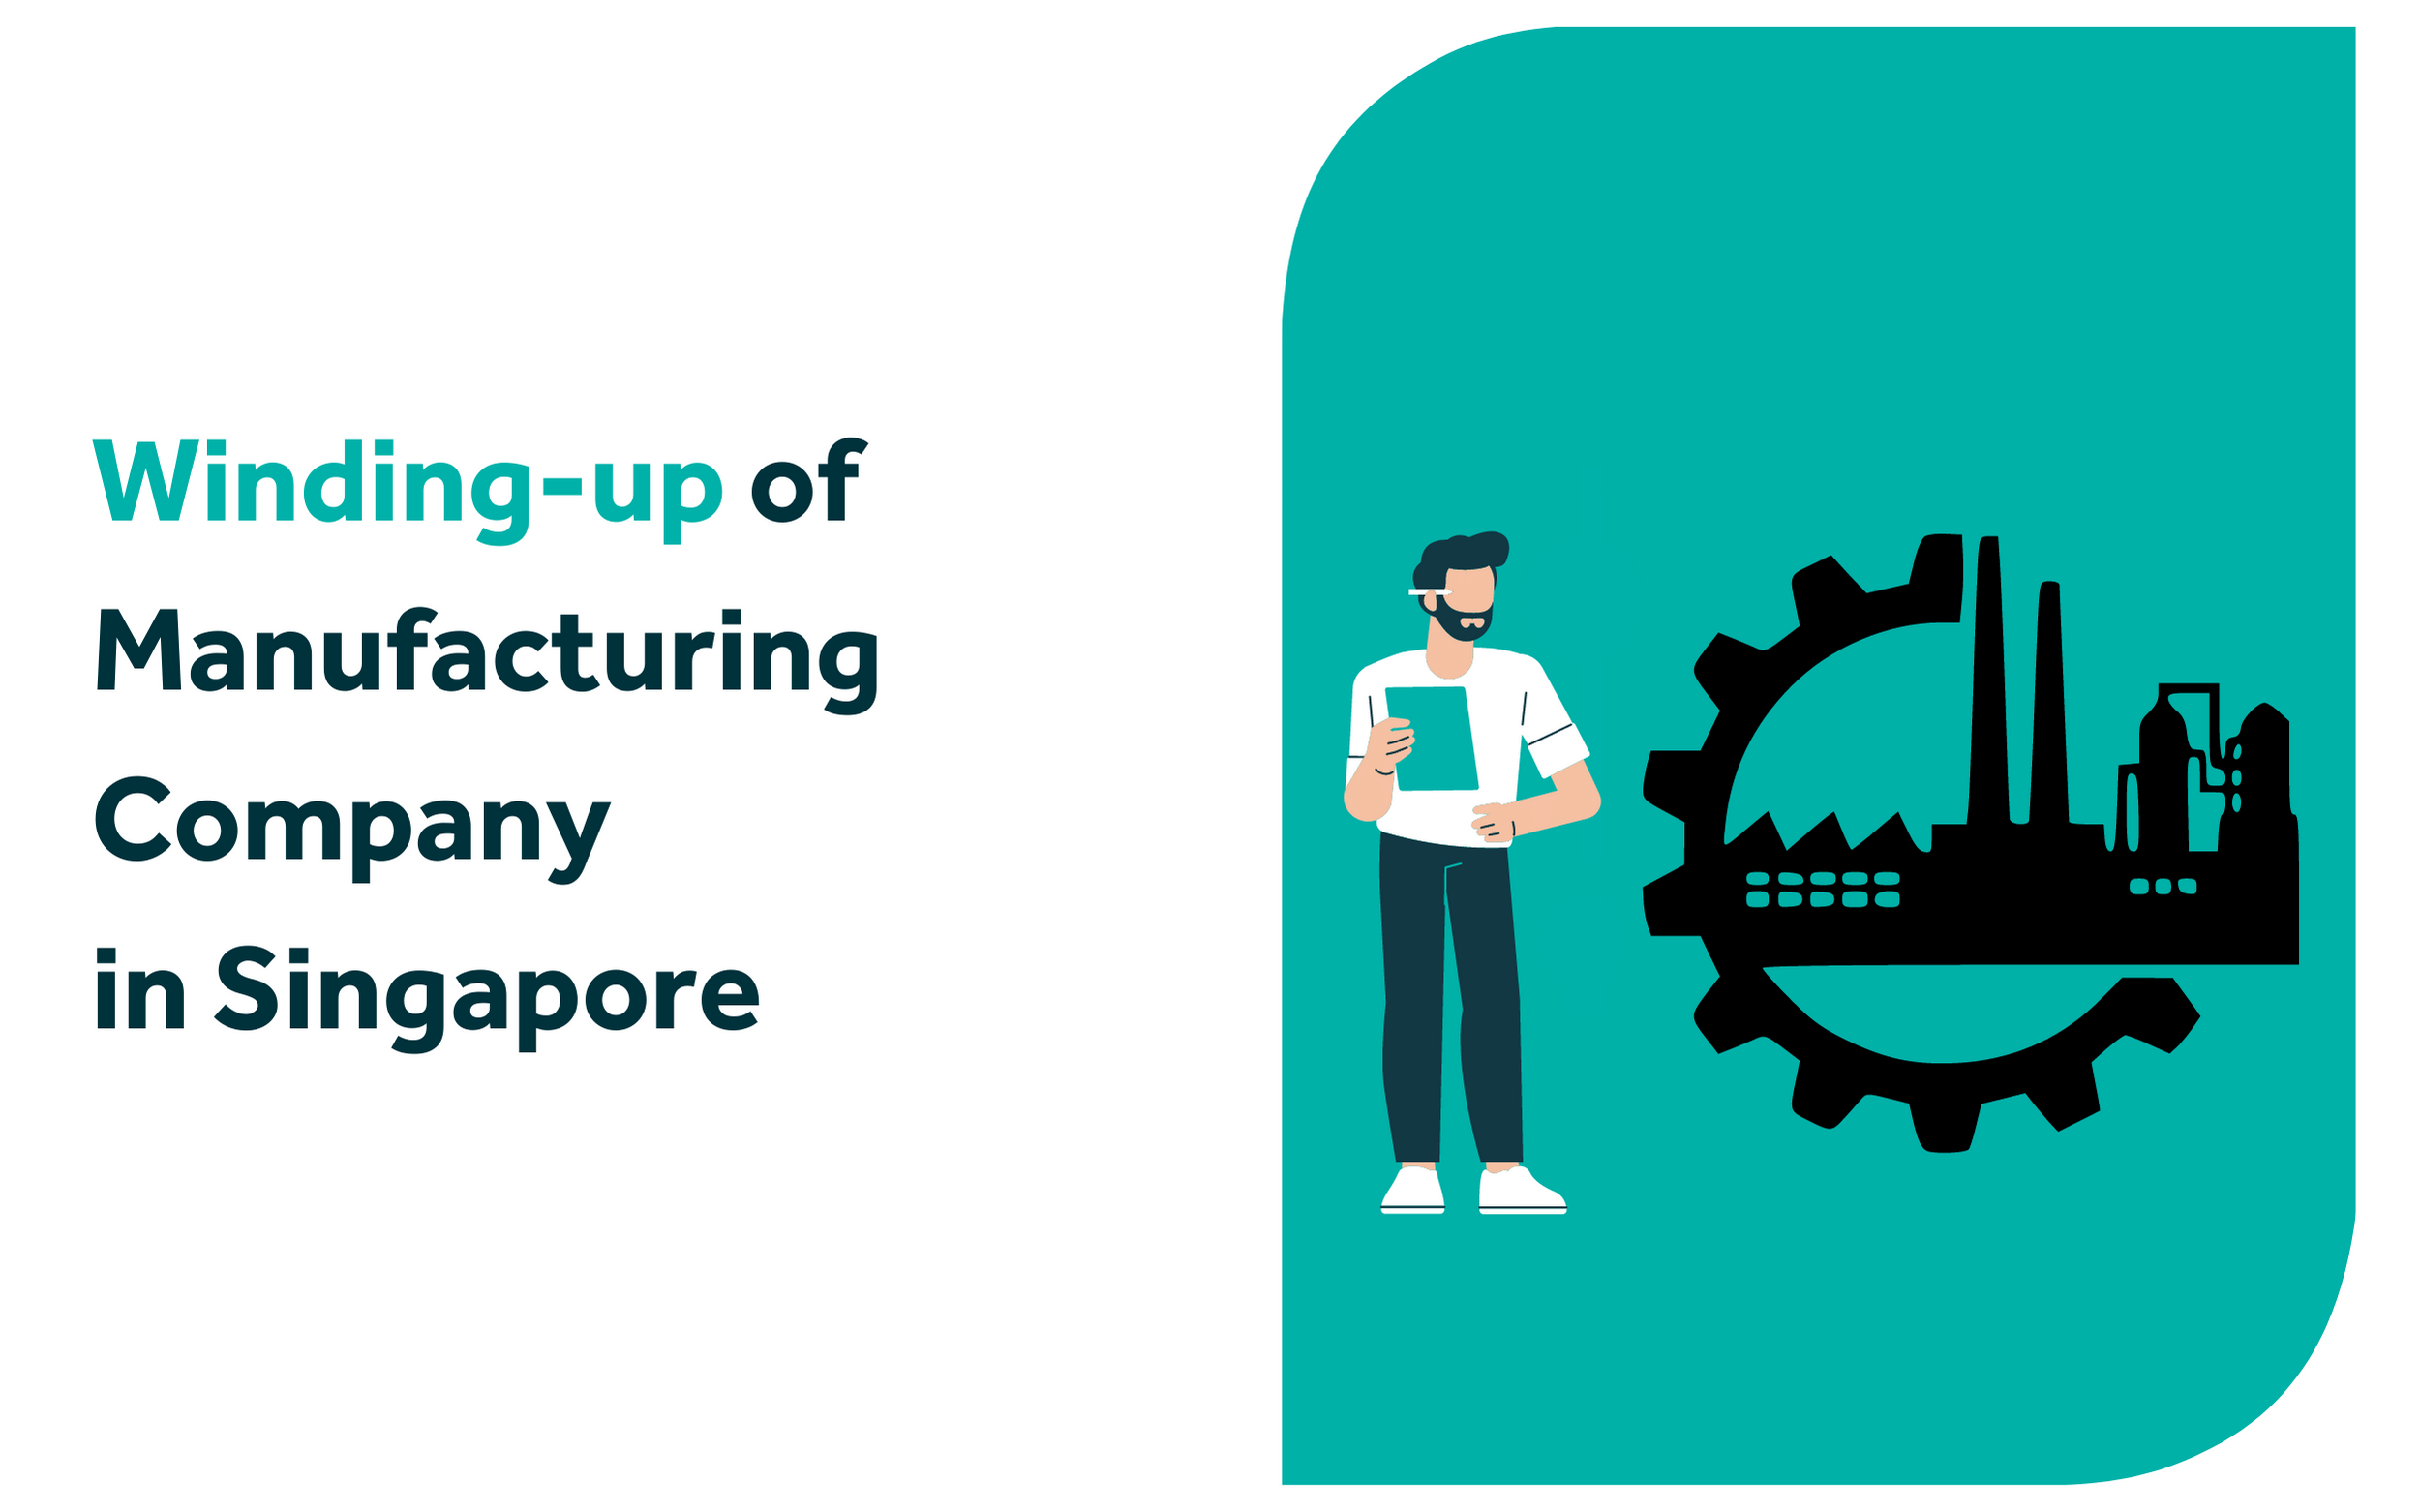 Winding-up of Manufacturing Company in Singapore